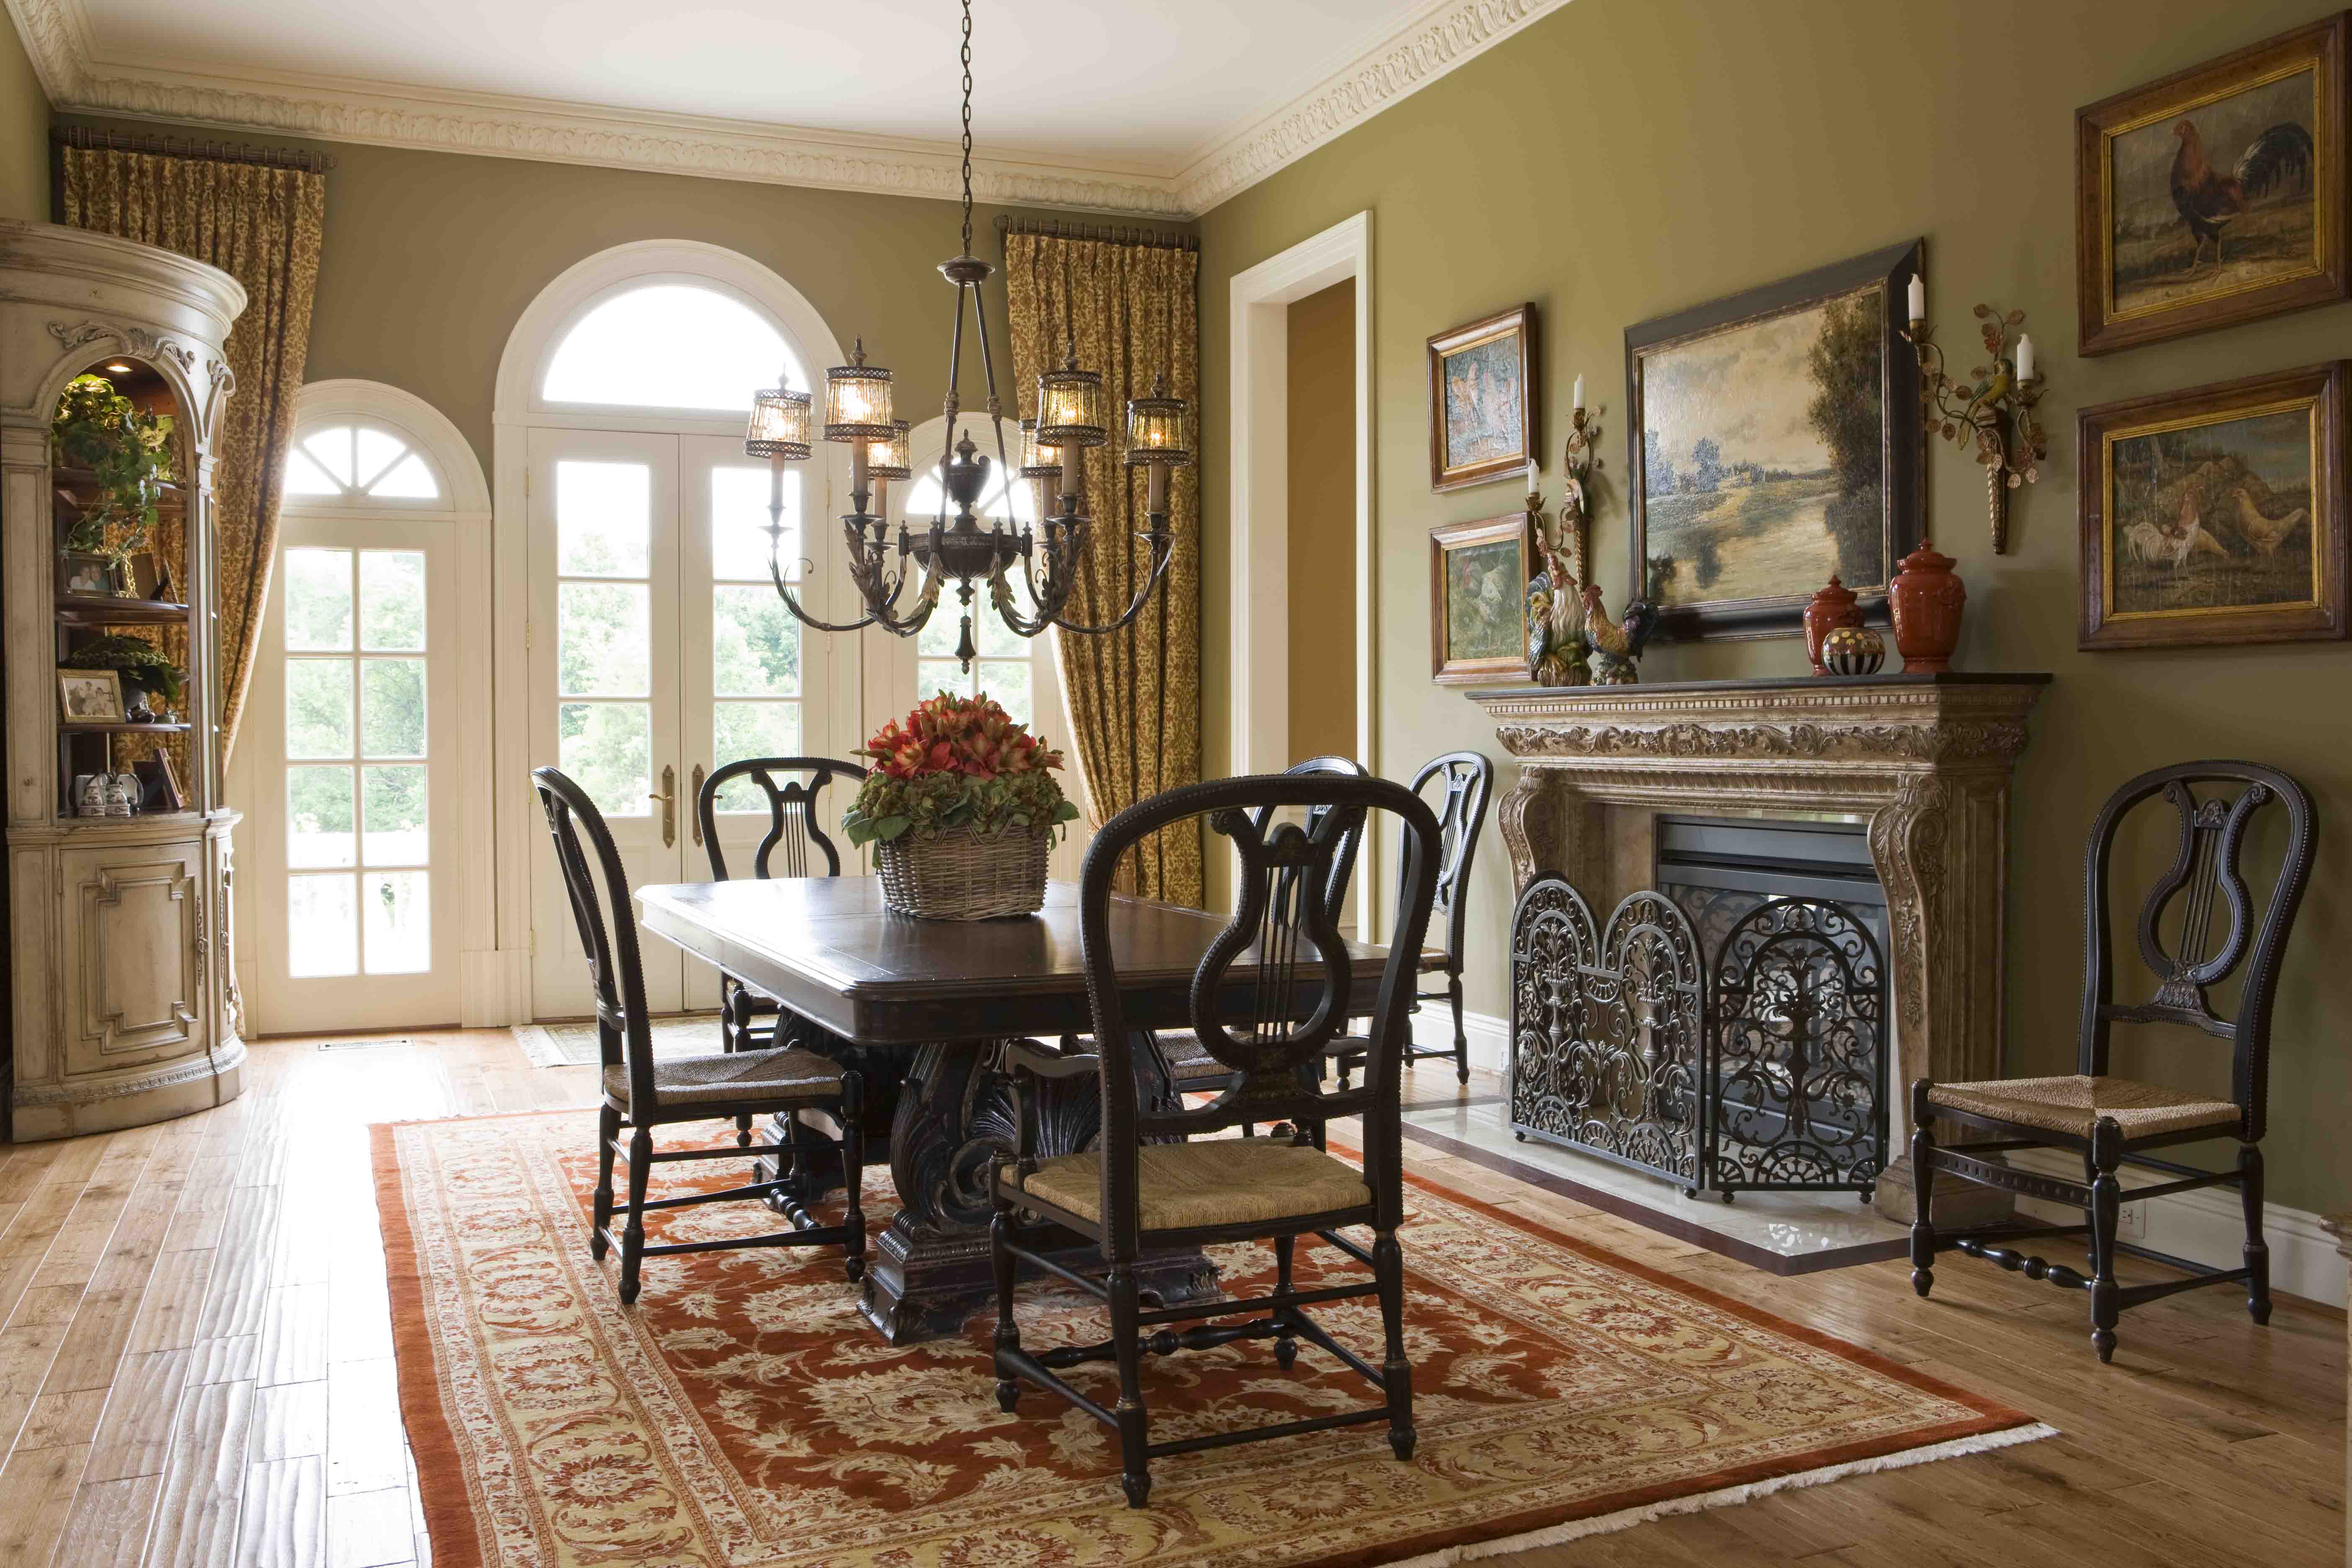 Custom dining room with fireplace with Persian rug in neutral colors